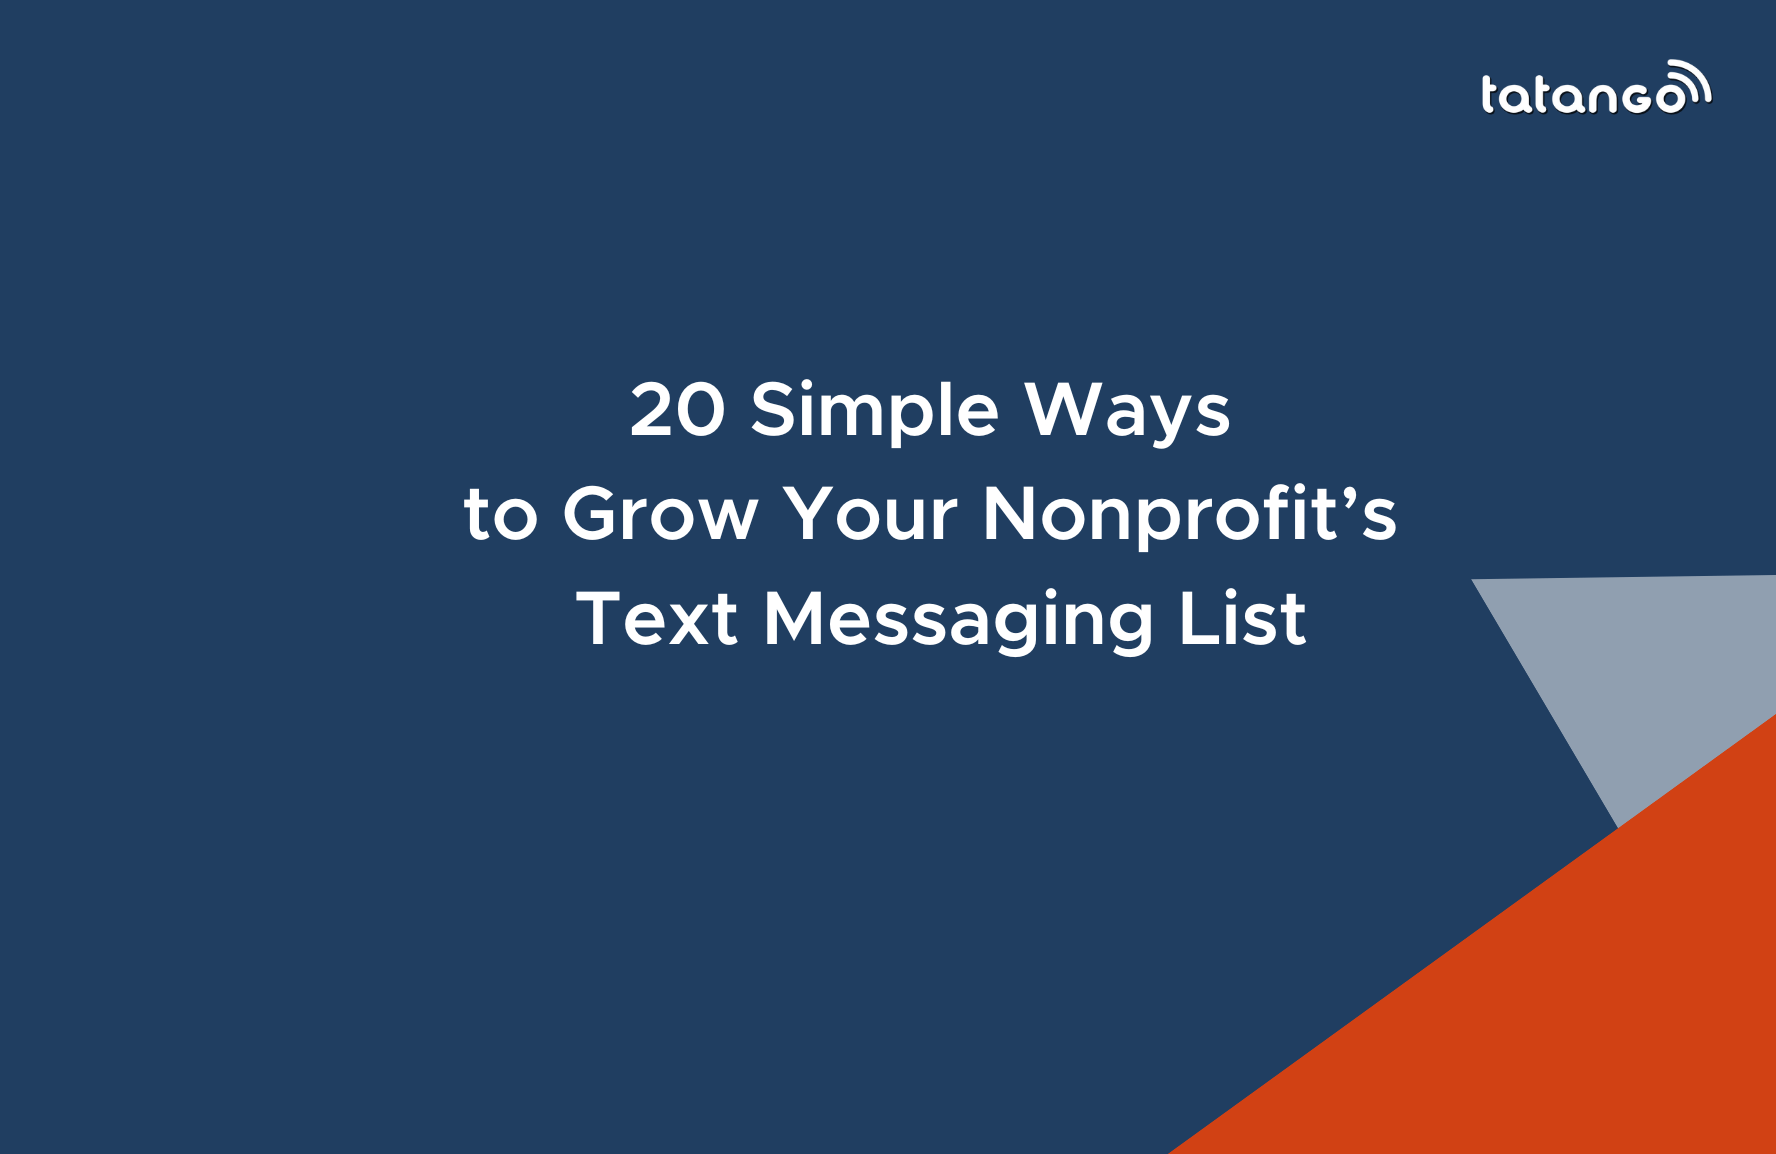 20 Simple Ways to Grow Your Nonprofit’s Text Messaging List